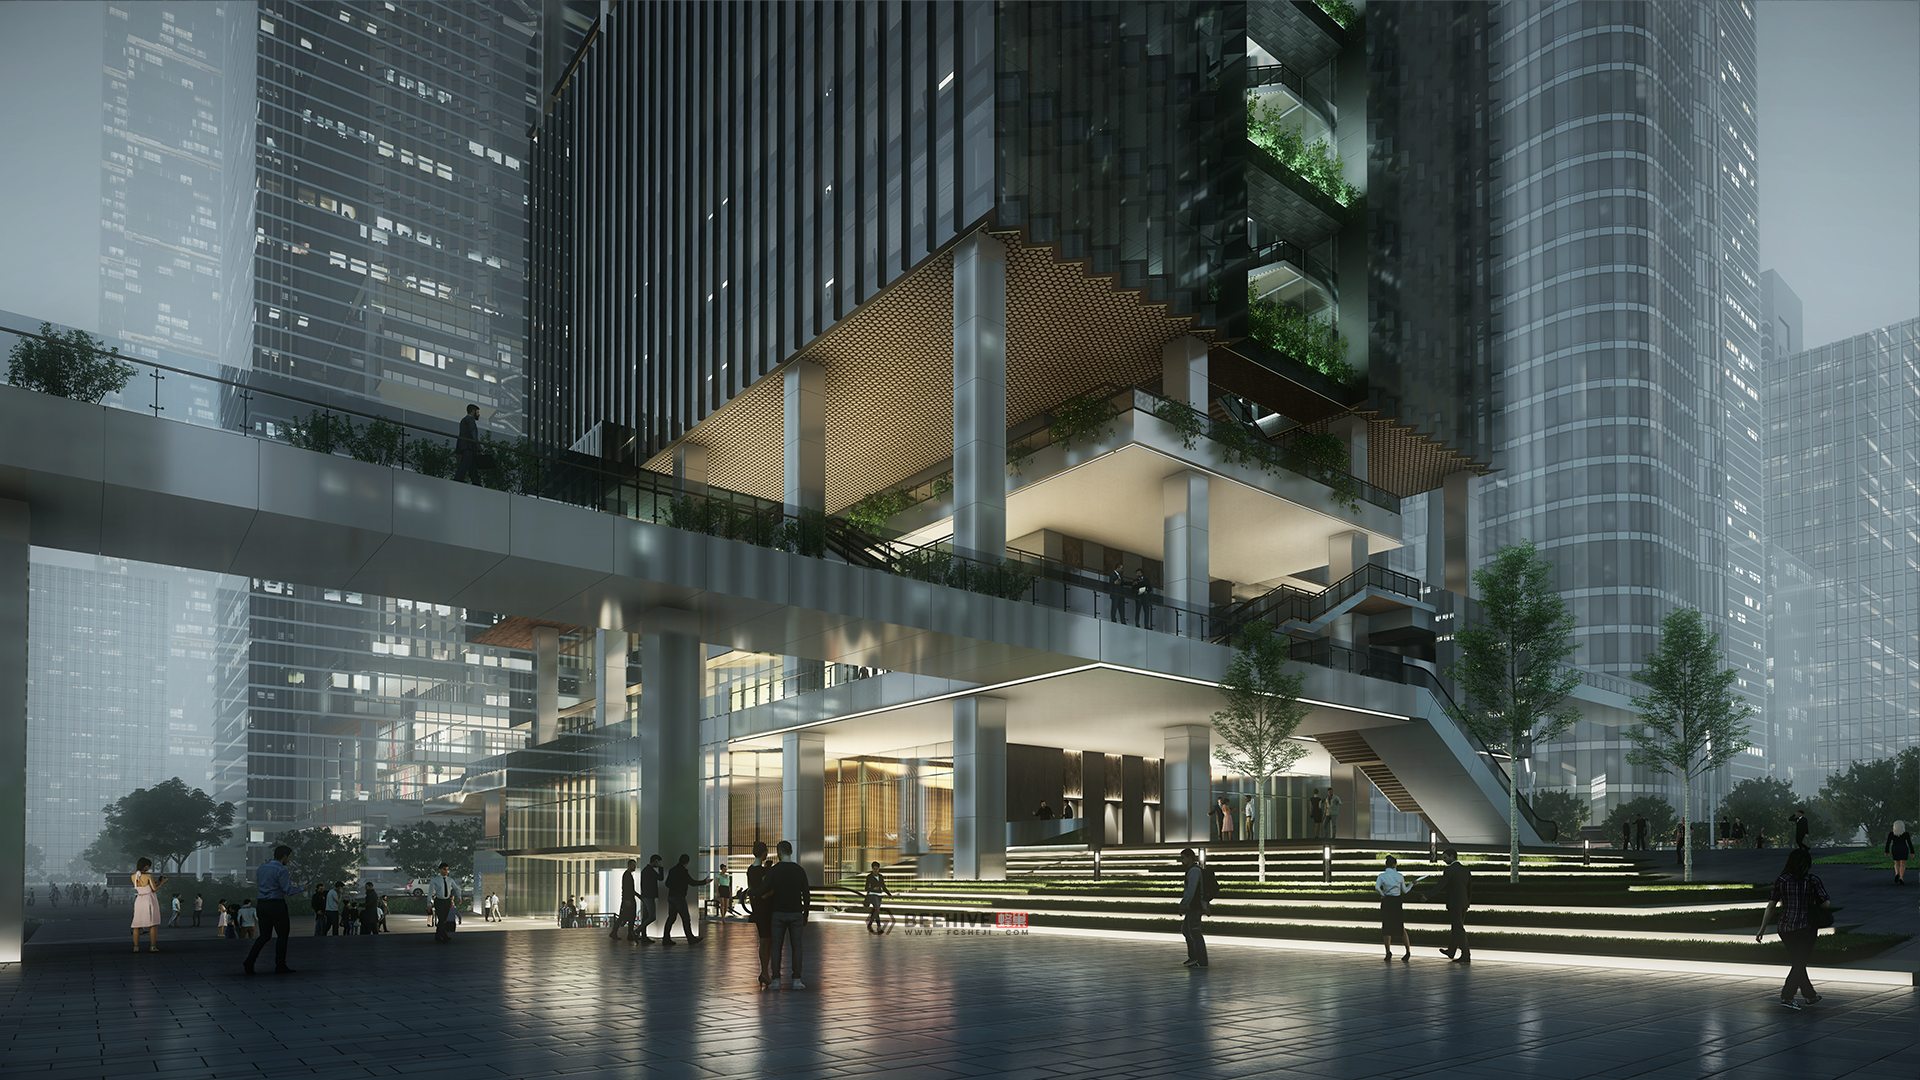 Shenzhen Transsion Tower. Design and Project Architect: Aedas. Client: Shenzhen Transsion Holdings.